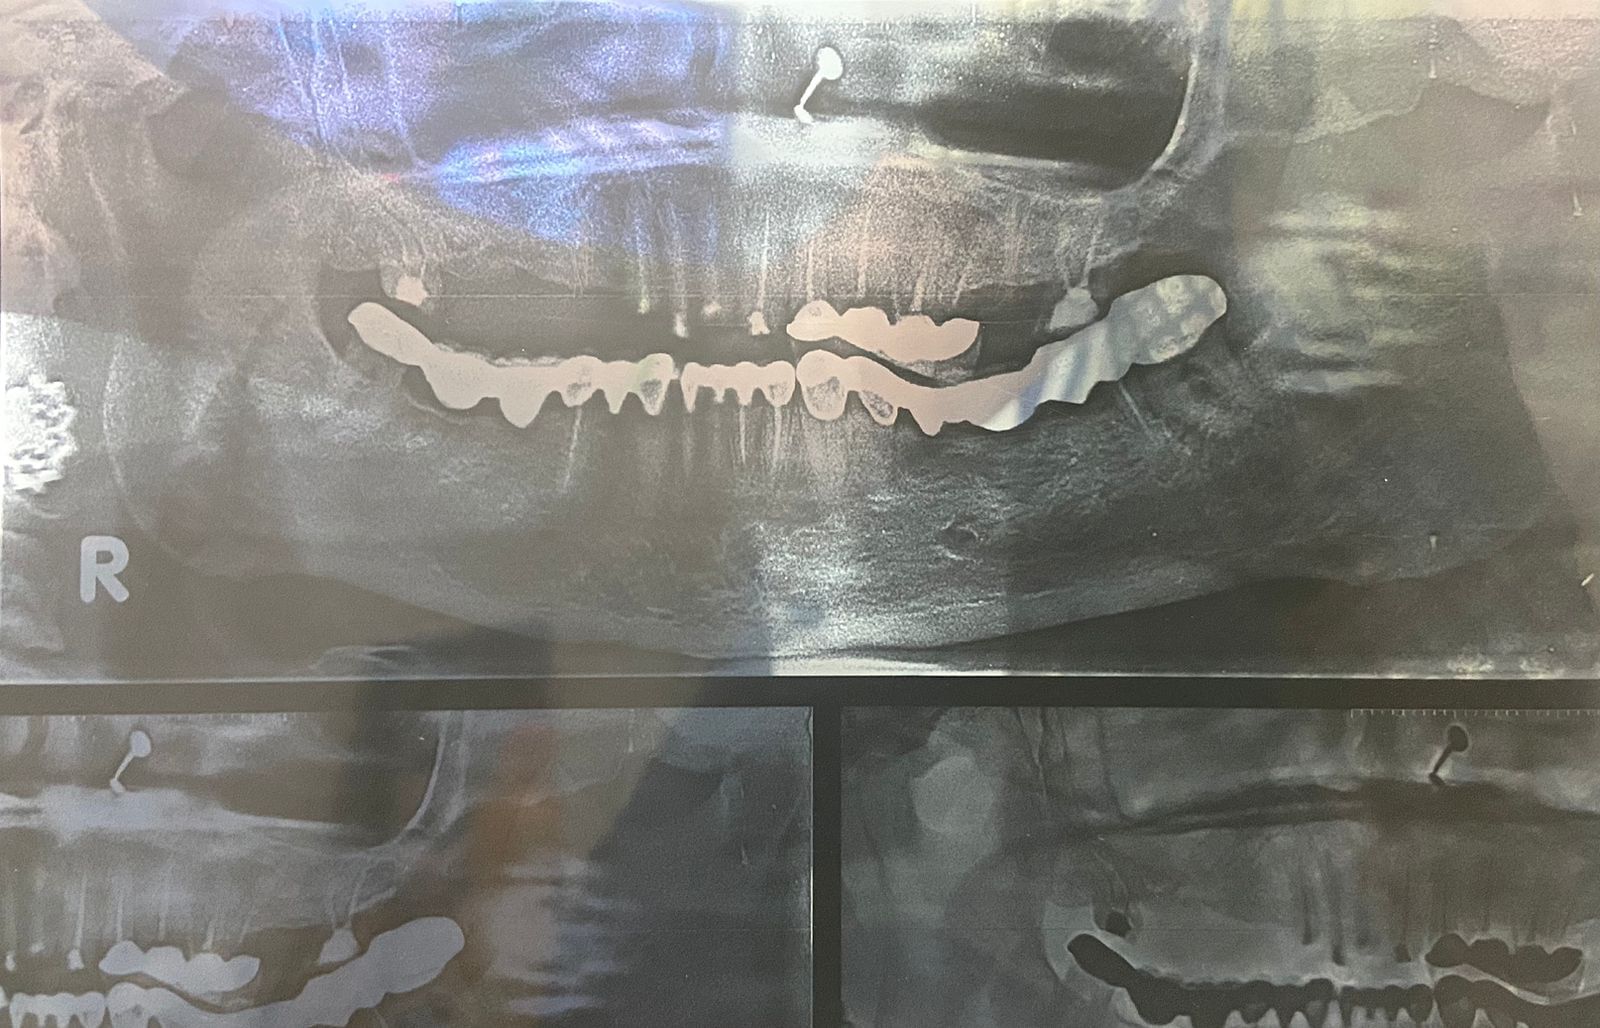 DENTAL IMPLANT SURGERY BEFORE AND AFTER XRAY